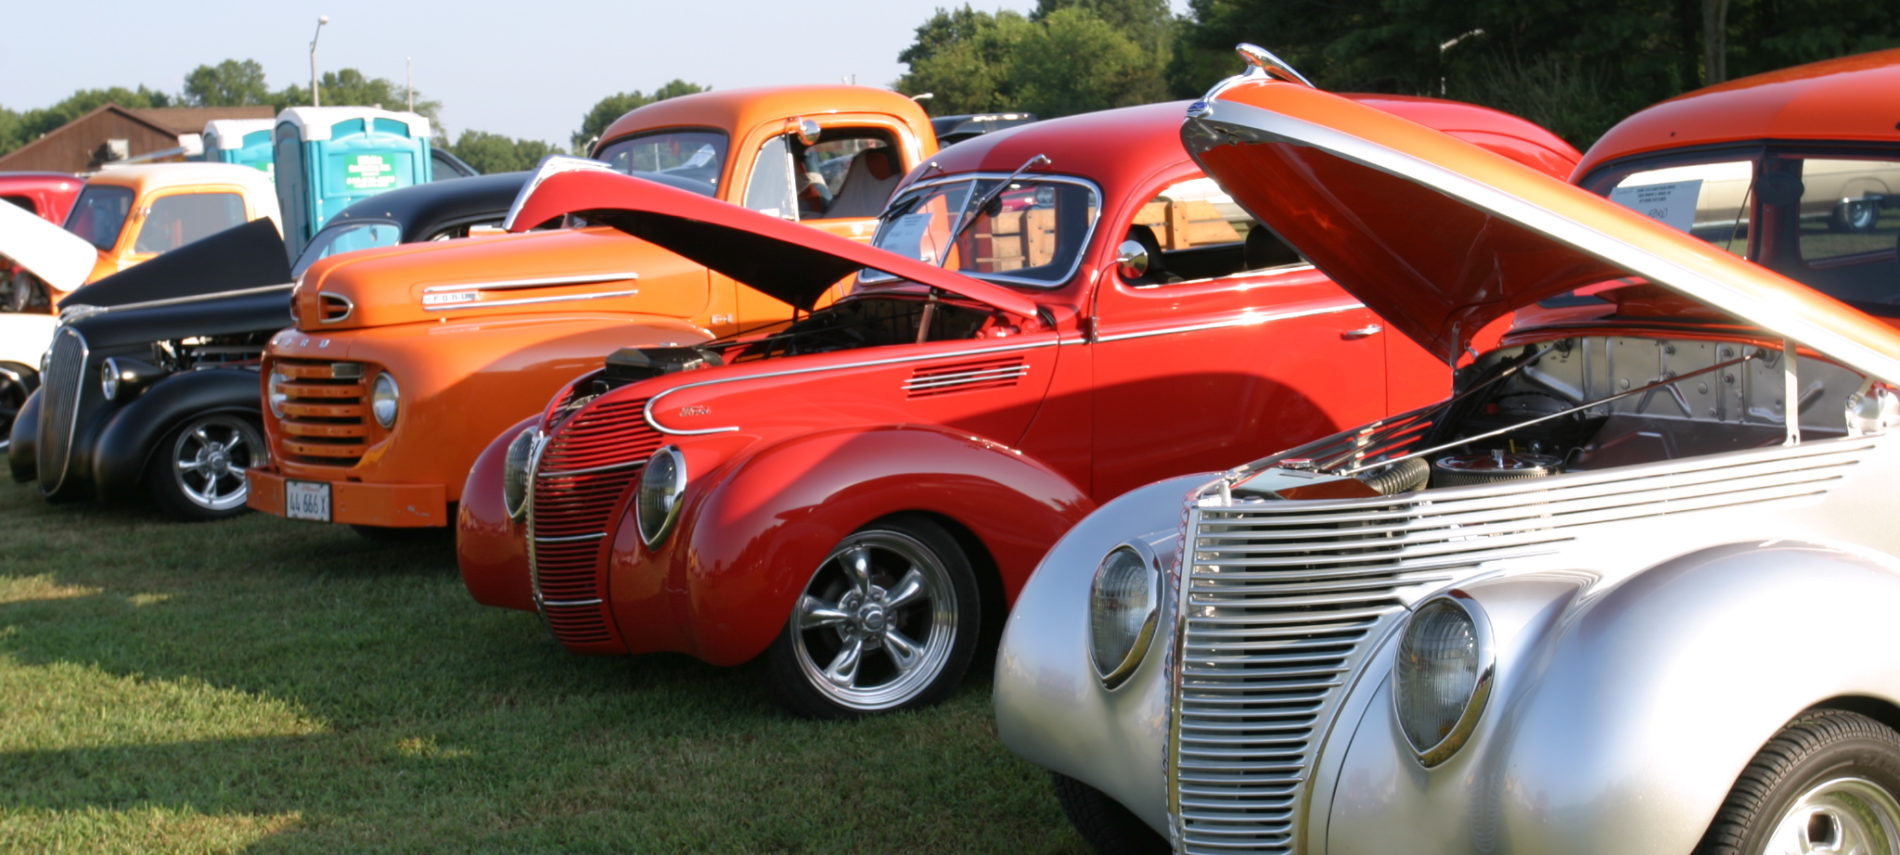 Various colors of classic Antique cars parked on lawn at car show, porta pots, trees.